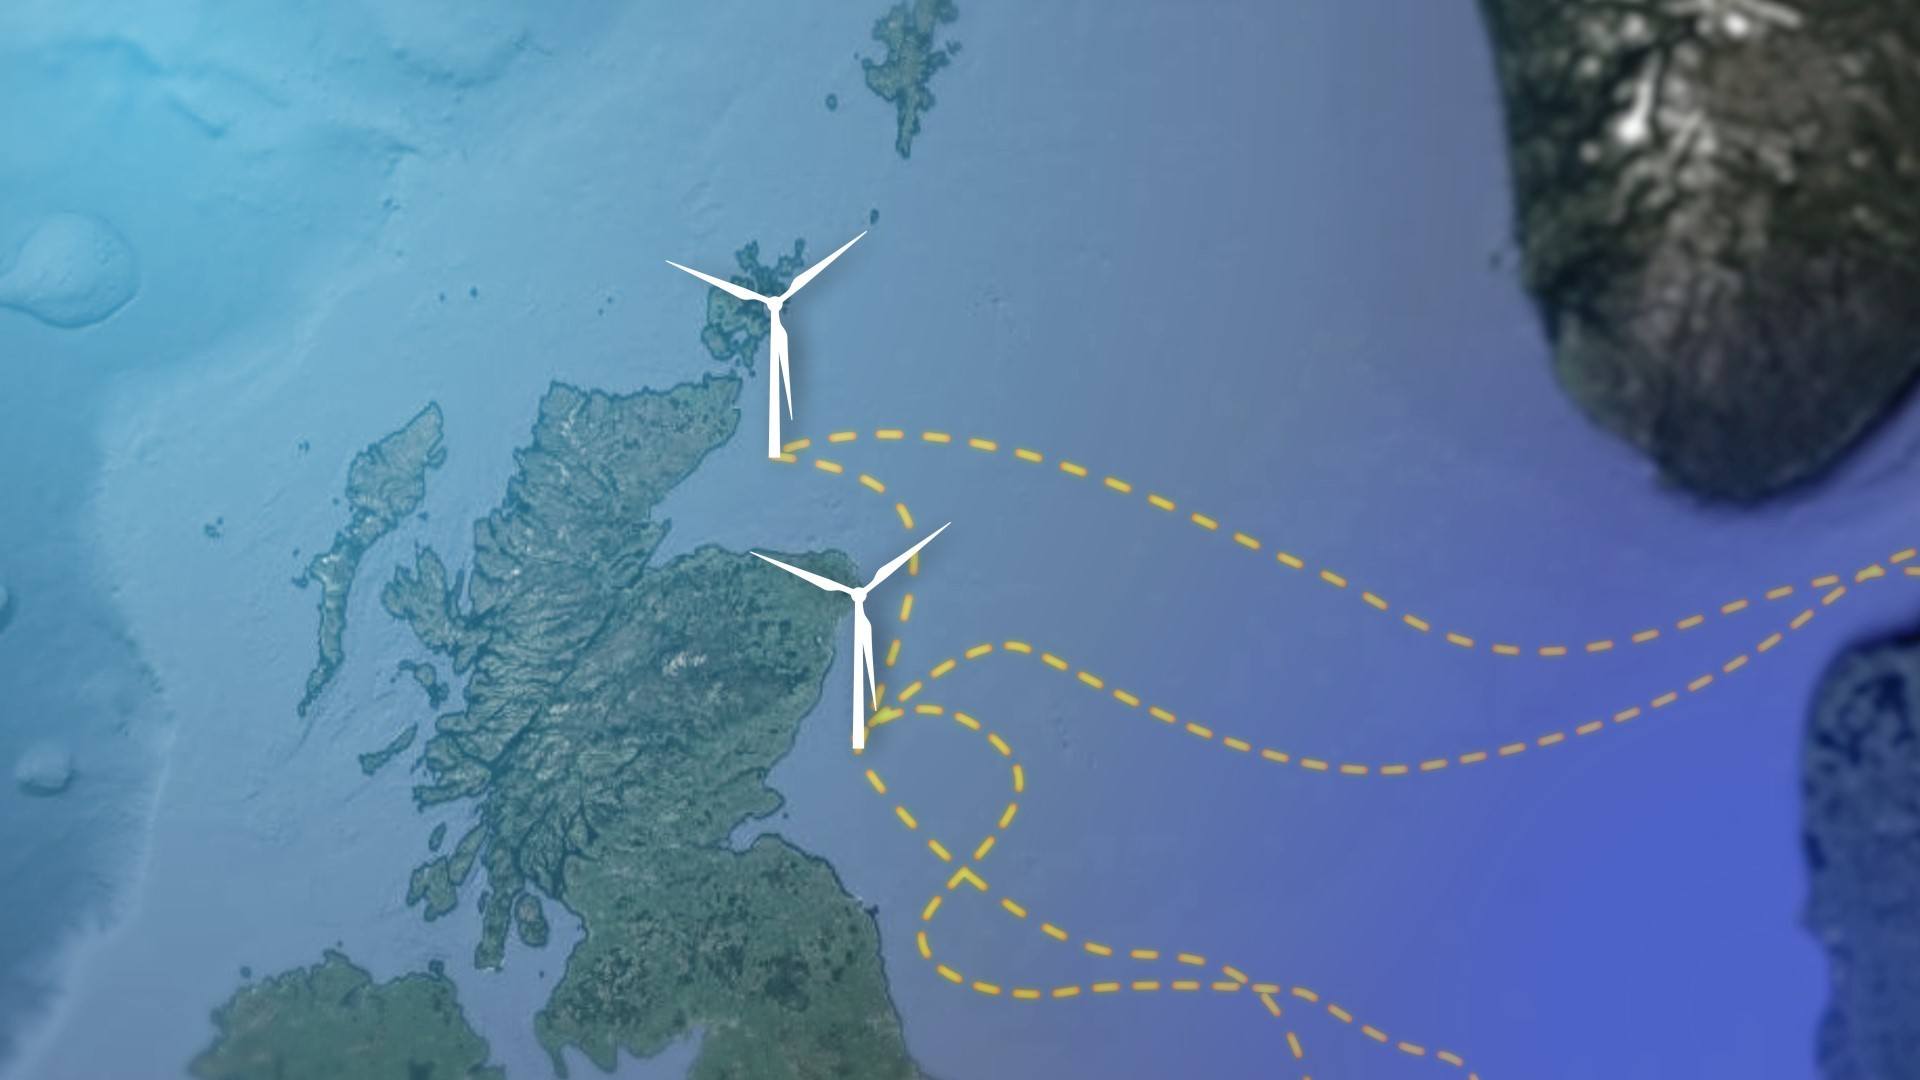 The approximate route of the Russian vessel that spent time in the Moray Firth and by the Seagreen Wind Farm off Aberdeen.